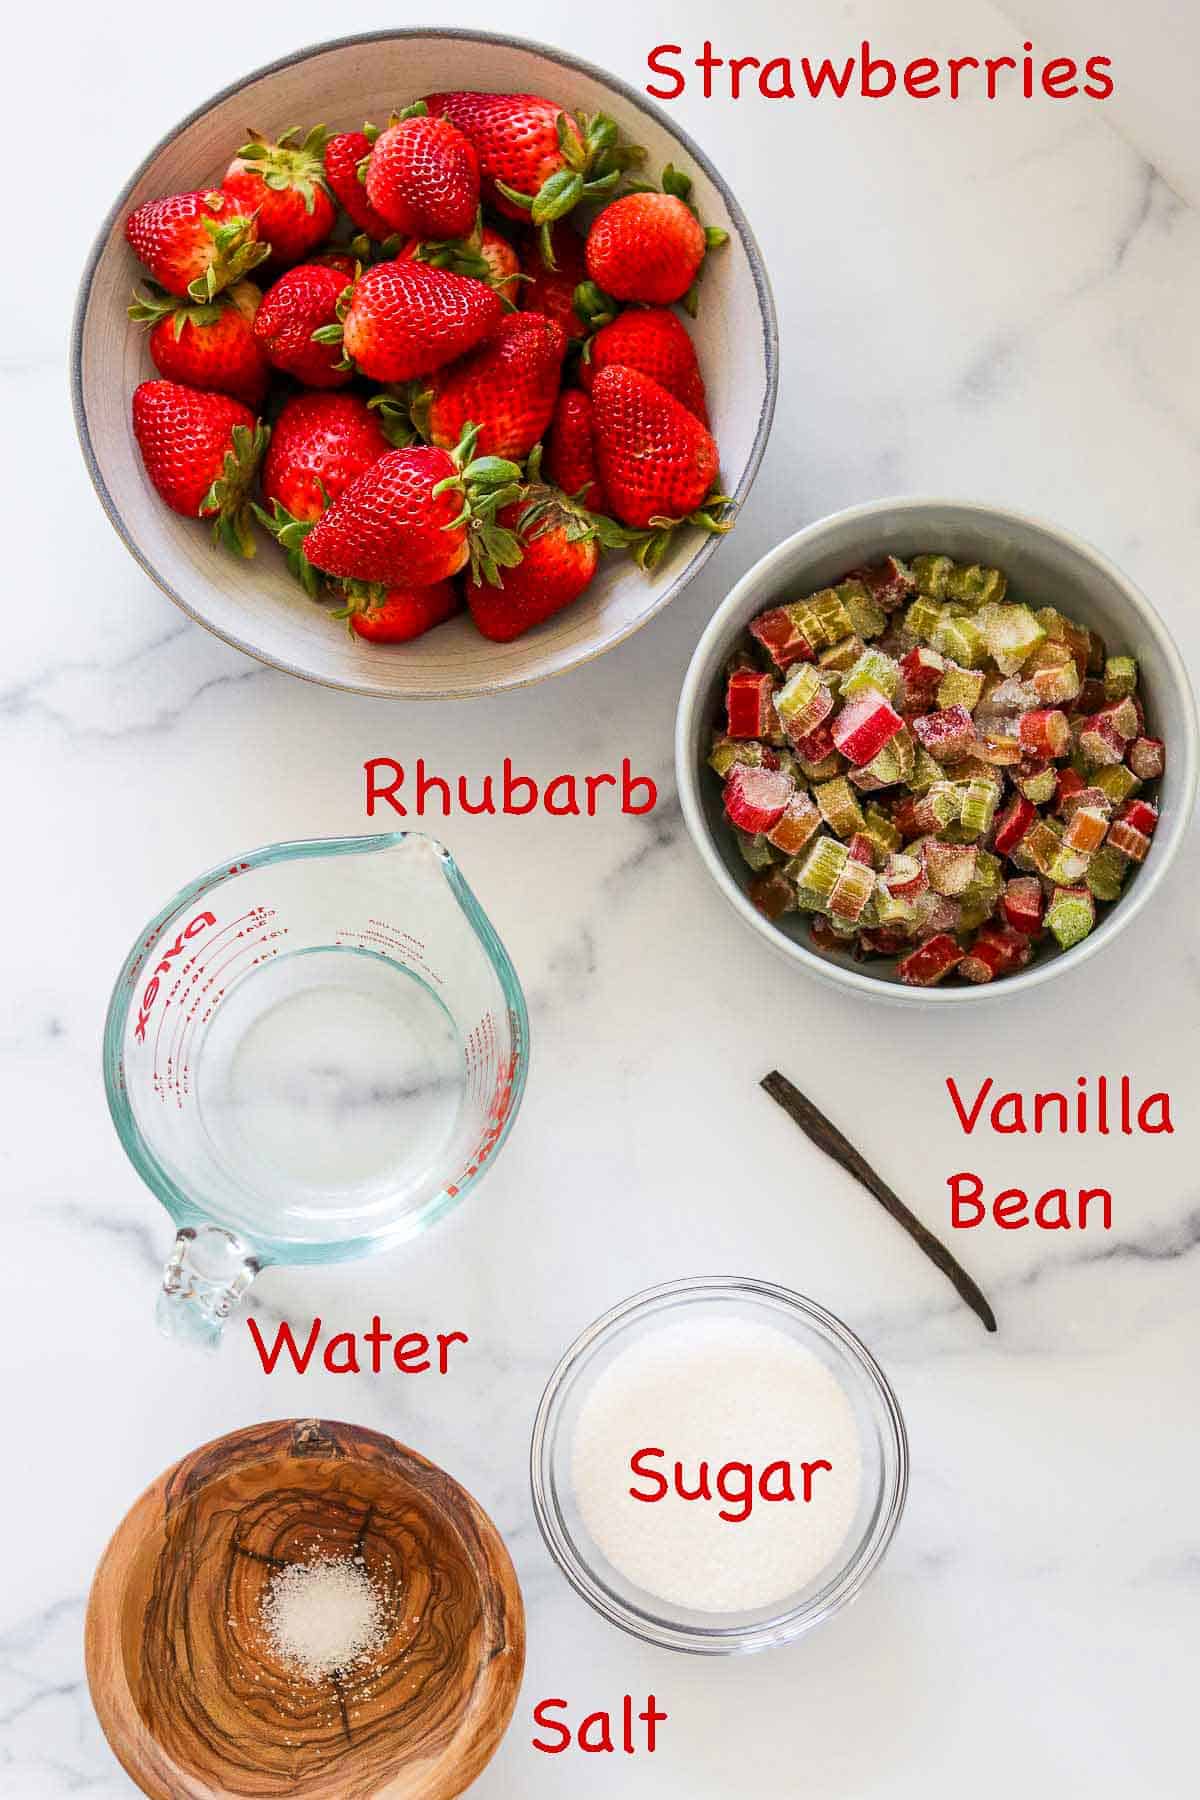 Labeled ingredients for Strawberry Rhubarb Compote.l